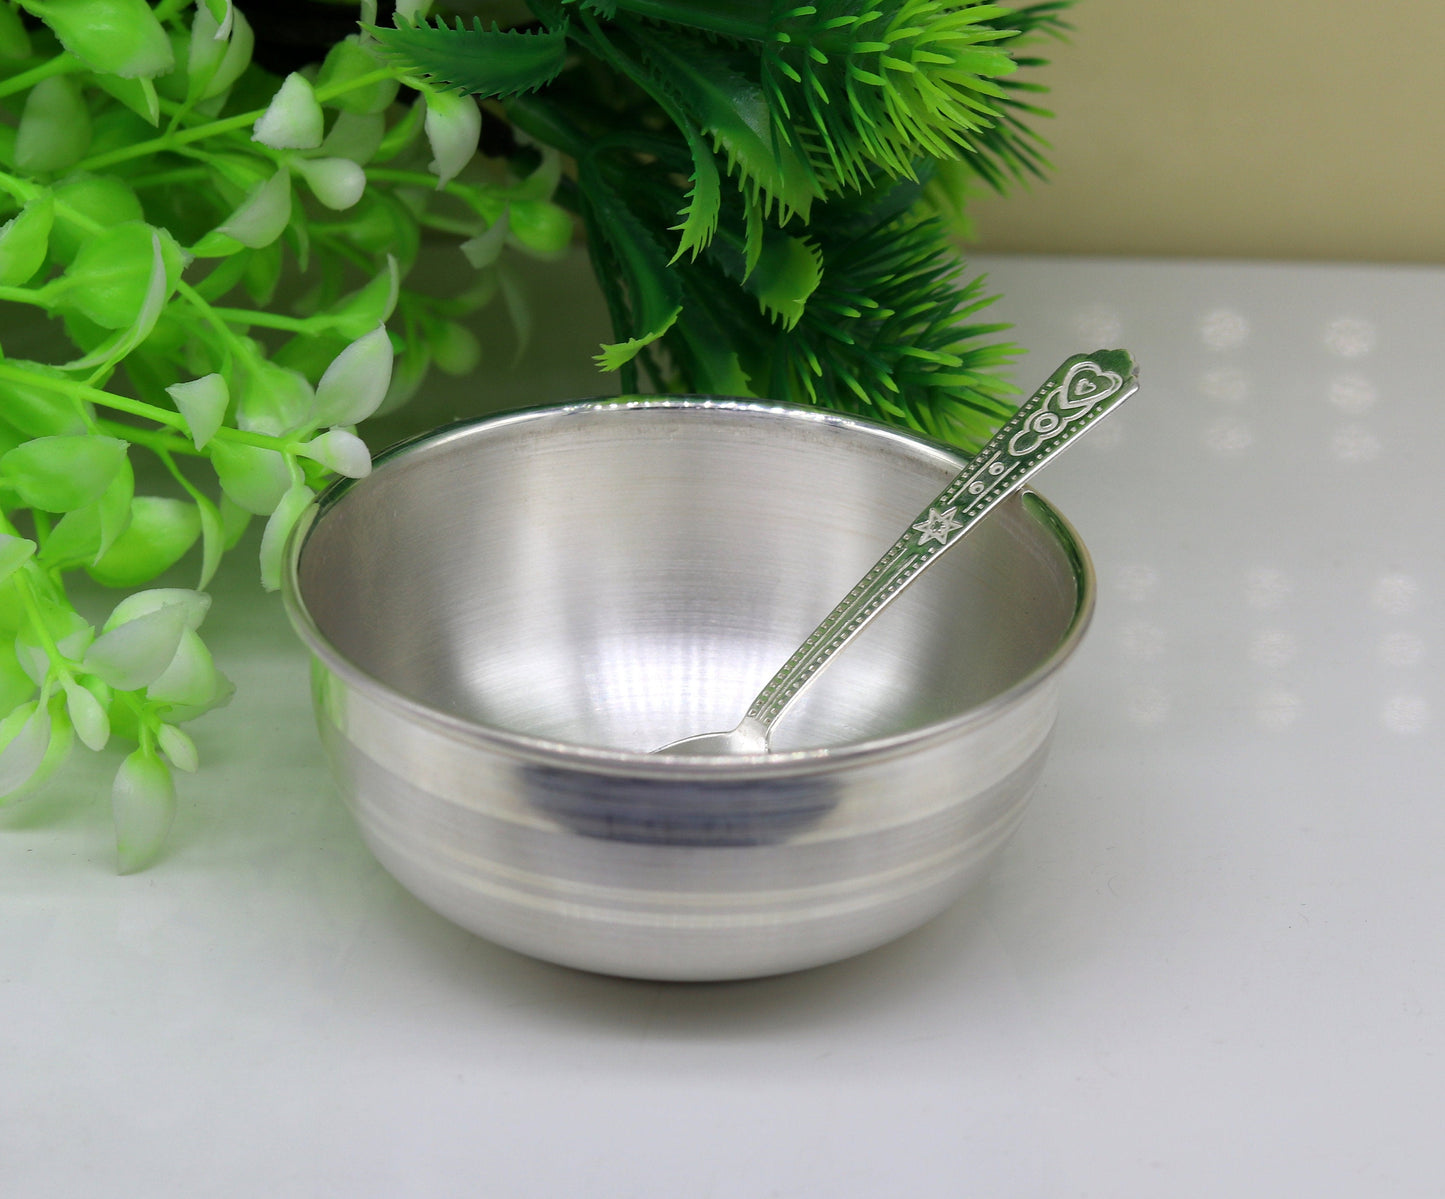 999 solid pure silver handmade utensils bowl and spoon, table serving bowl, silver vessel, baby feeding, silver kitchen art baby set sv88 - TRIBAL ORNAMENTS